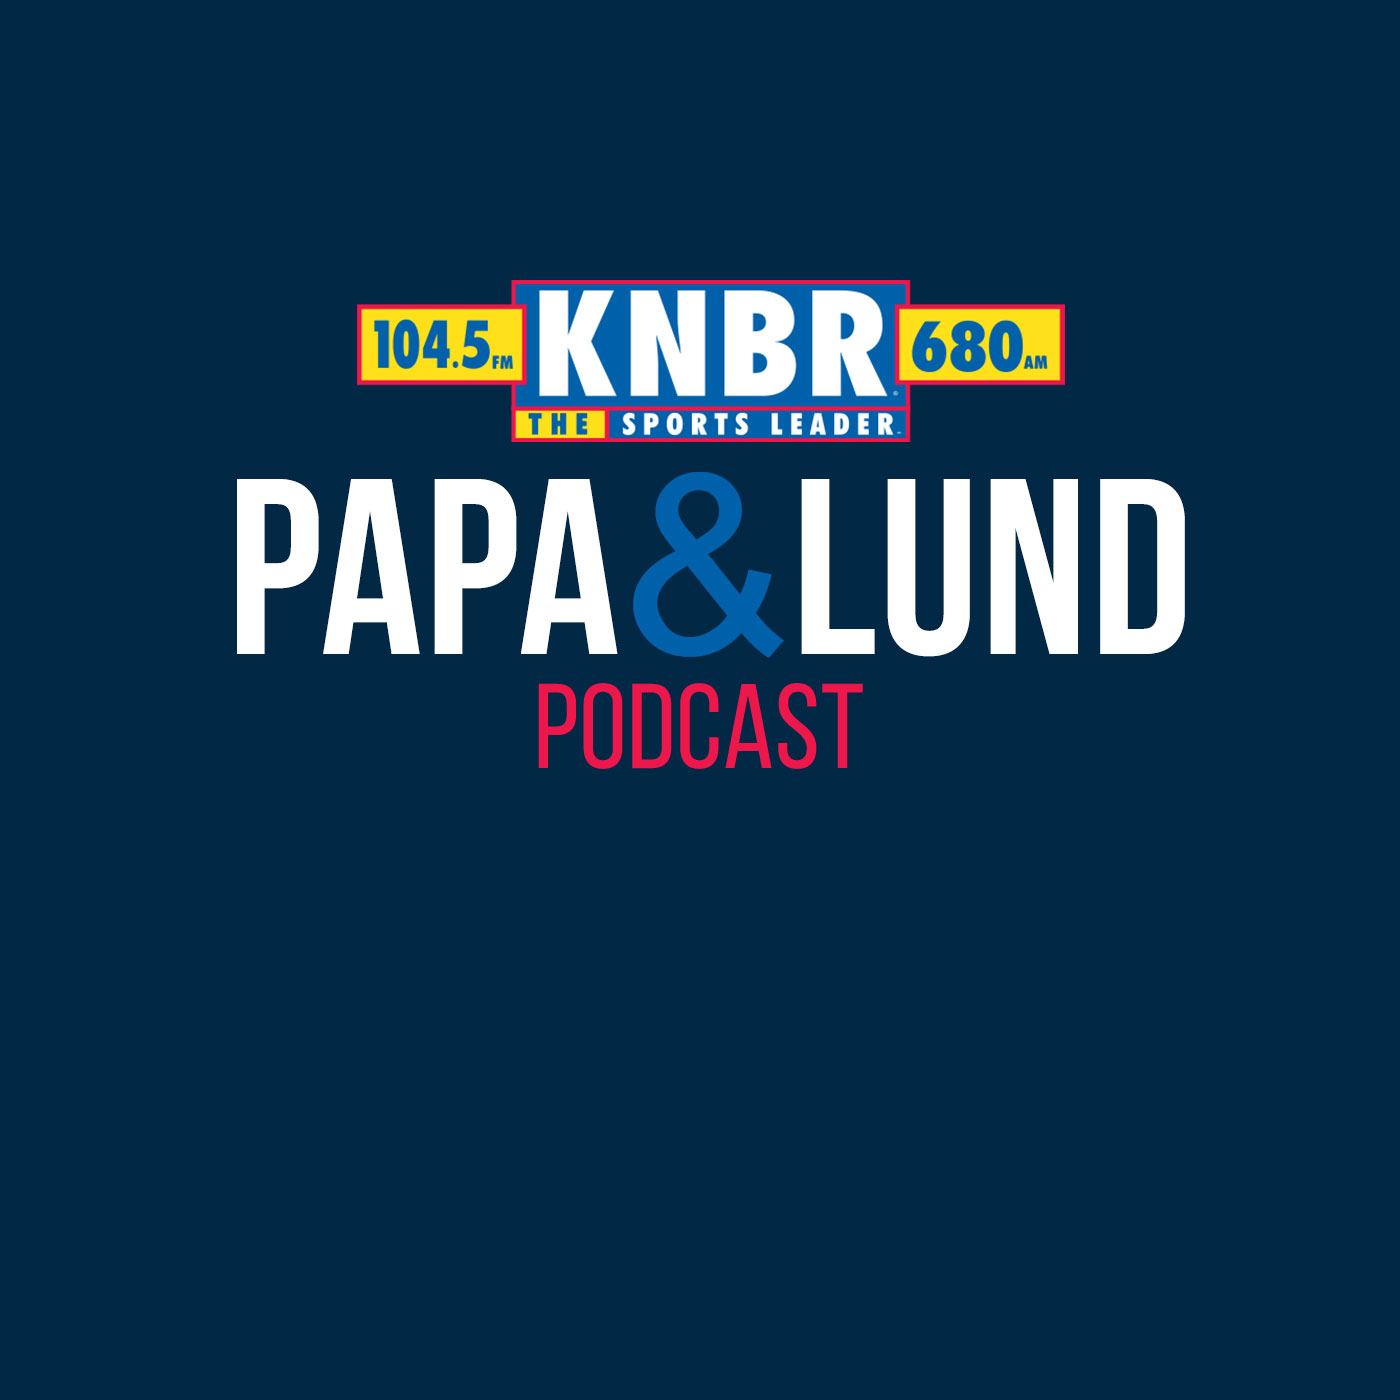 10-27 Kirk Morrison joins Papa & Lund to preview another clash in the NFC West between the 49ers and Rams